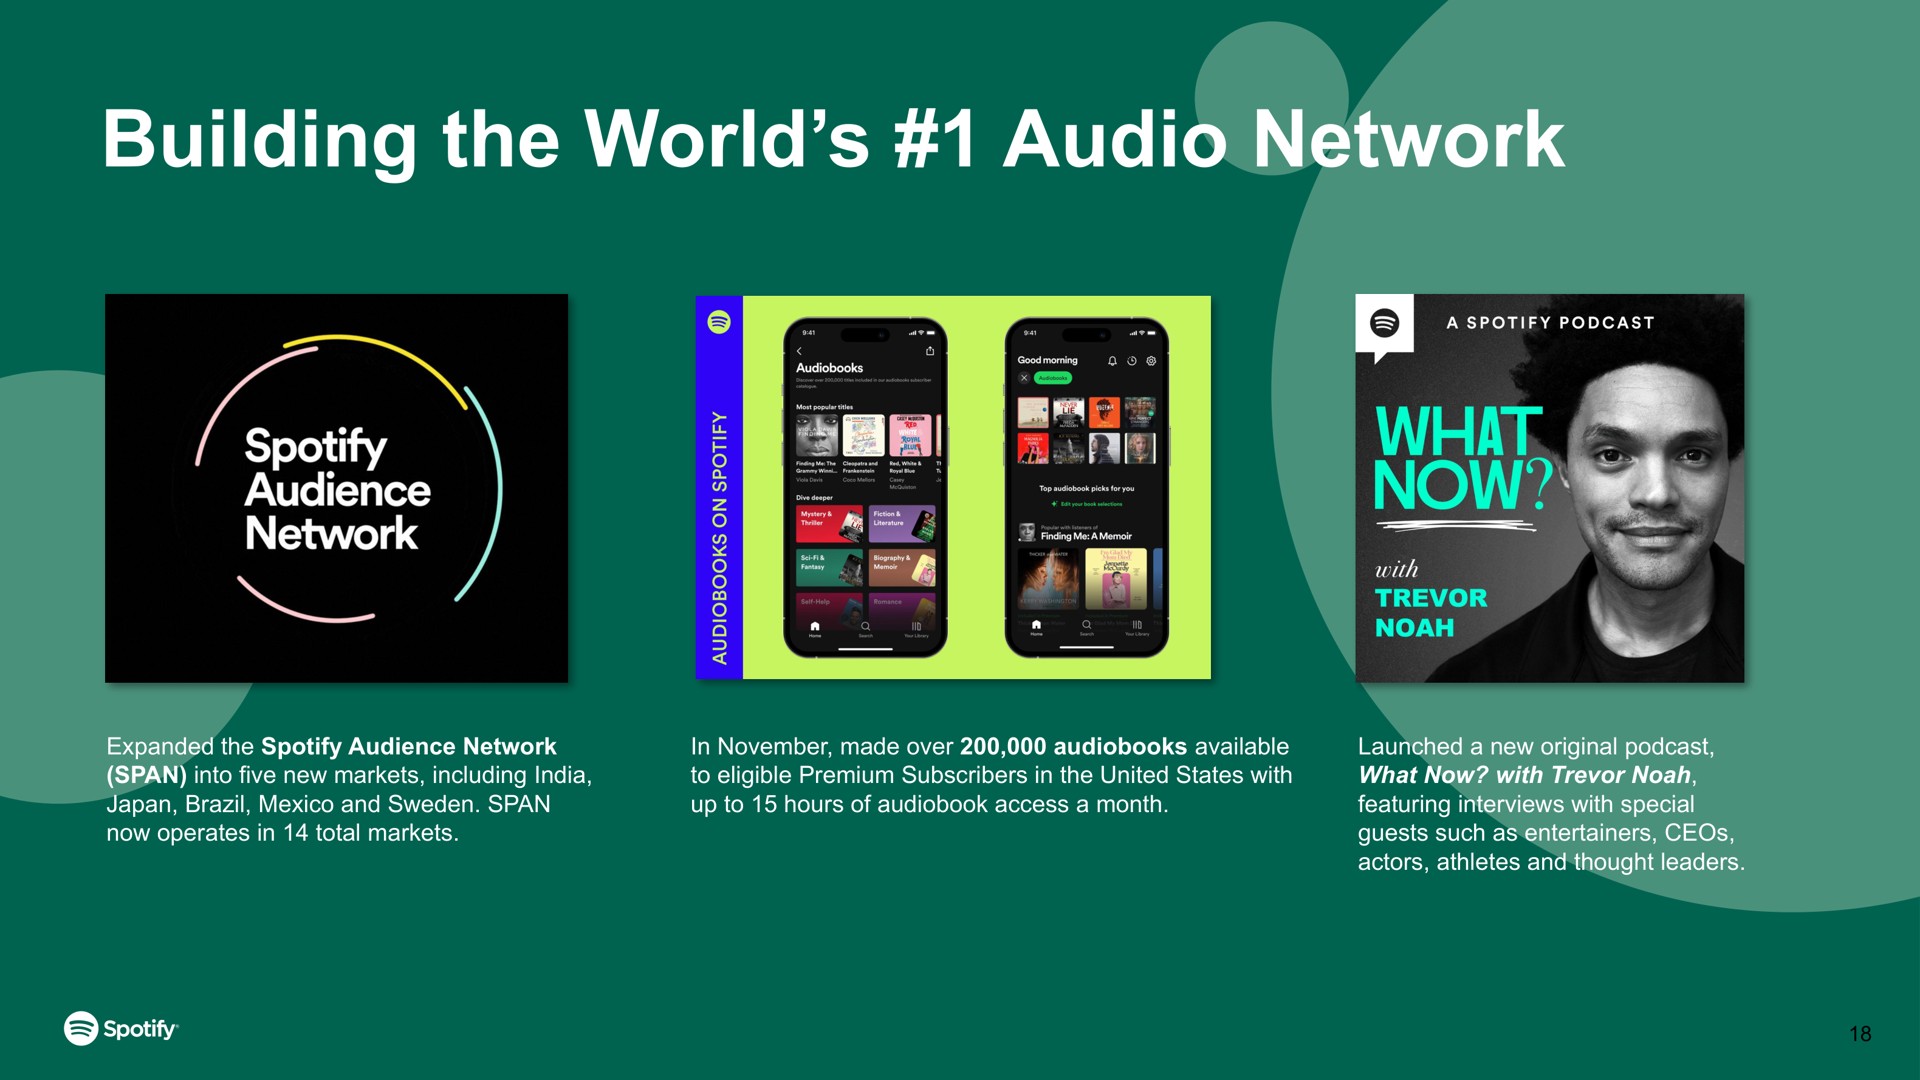 building the world audio network a audience | Spotify